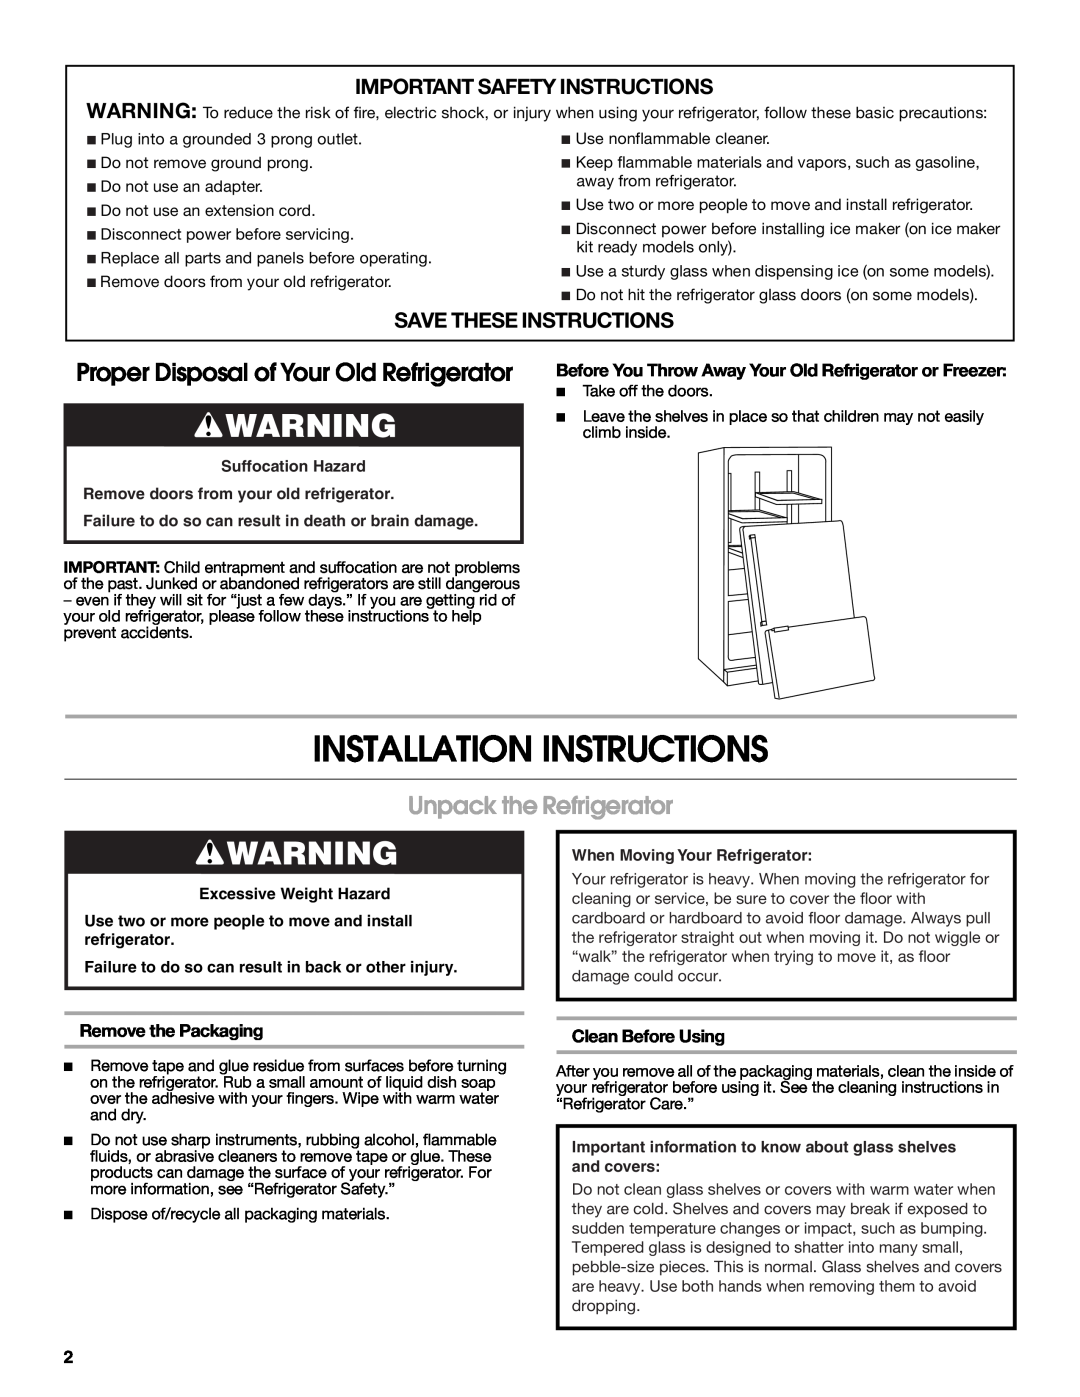 Jenn-Air W10329370A Installation Instructions, Proper Disposal of Your Old Refrigerator, Unpack the Refrigerator 